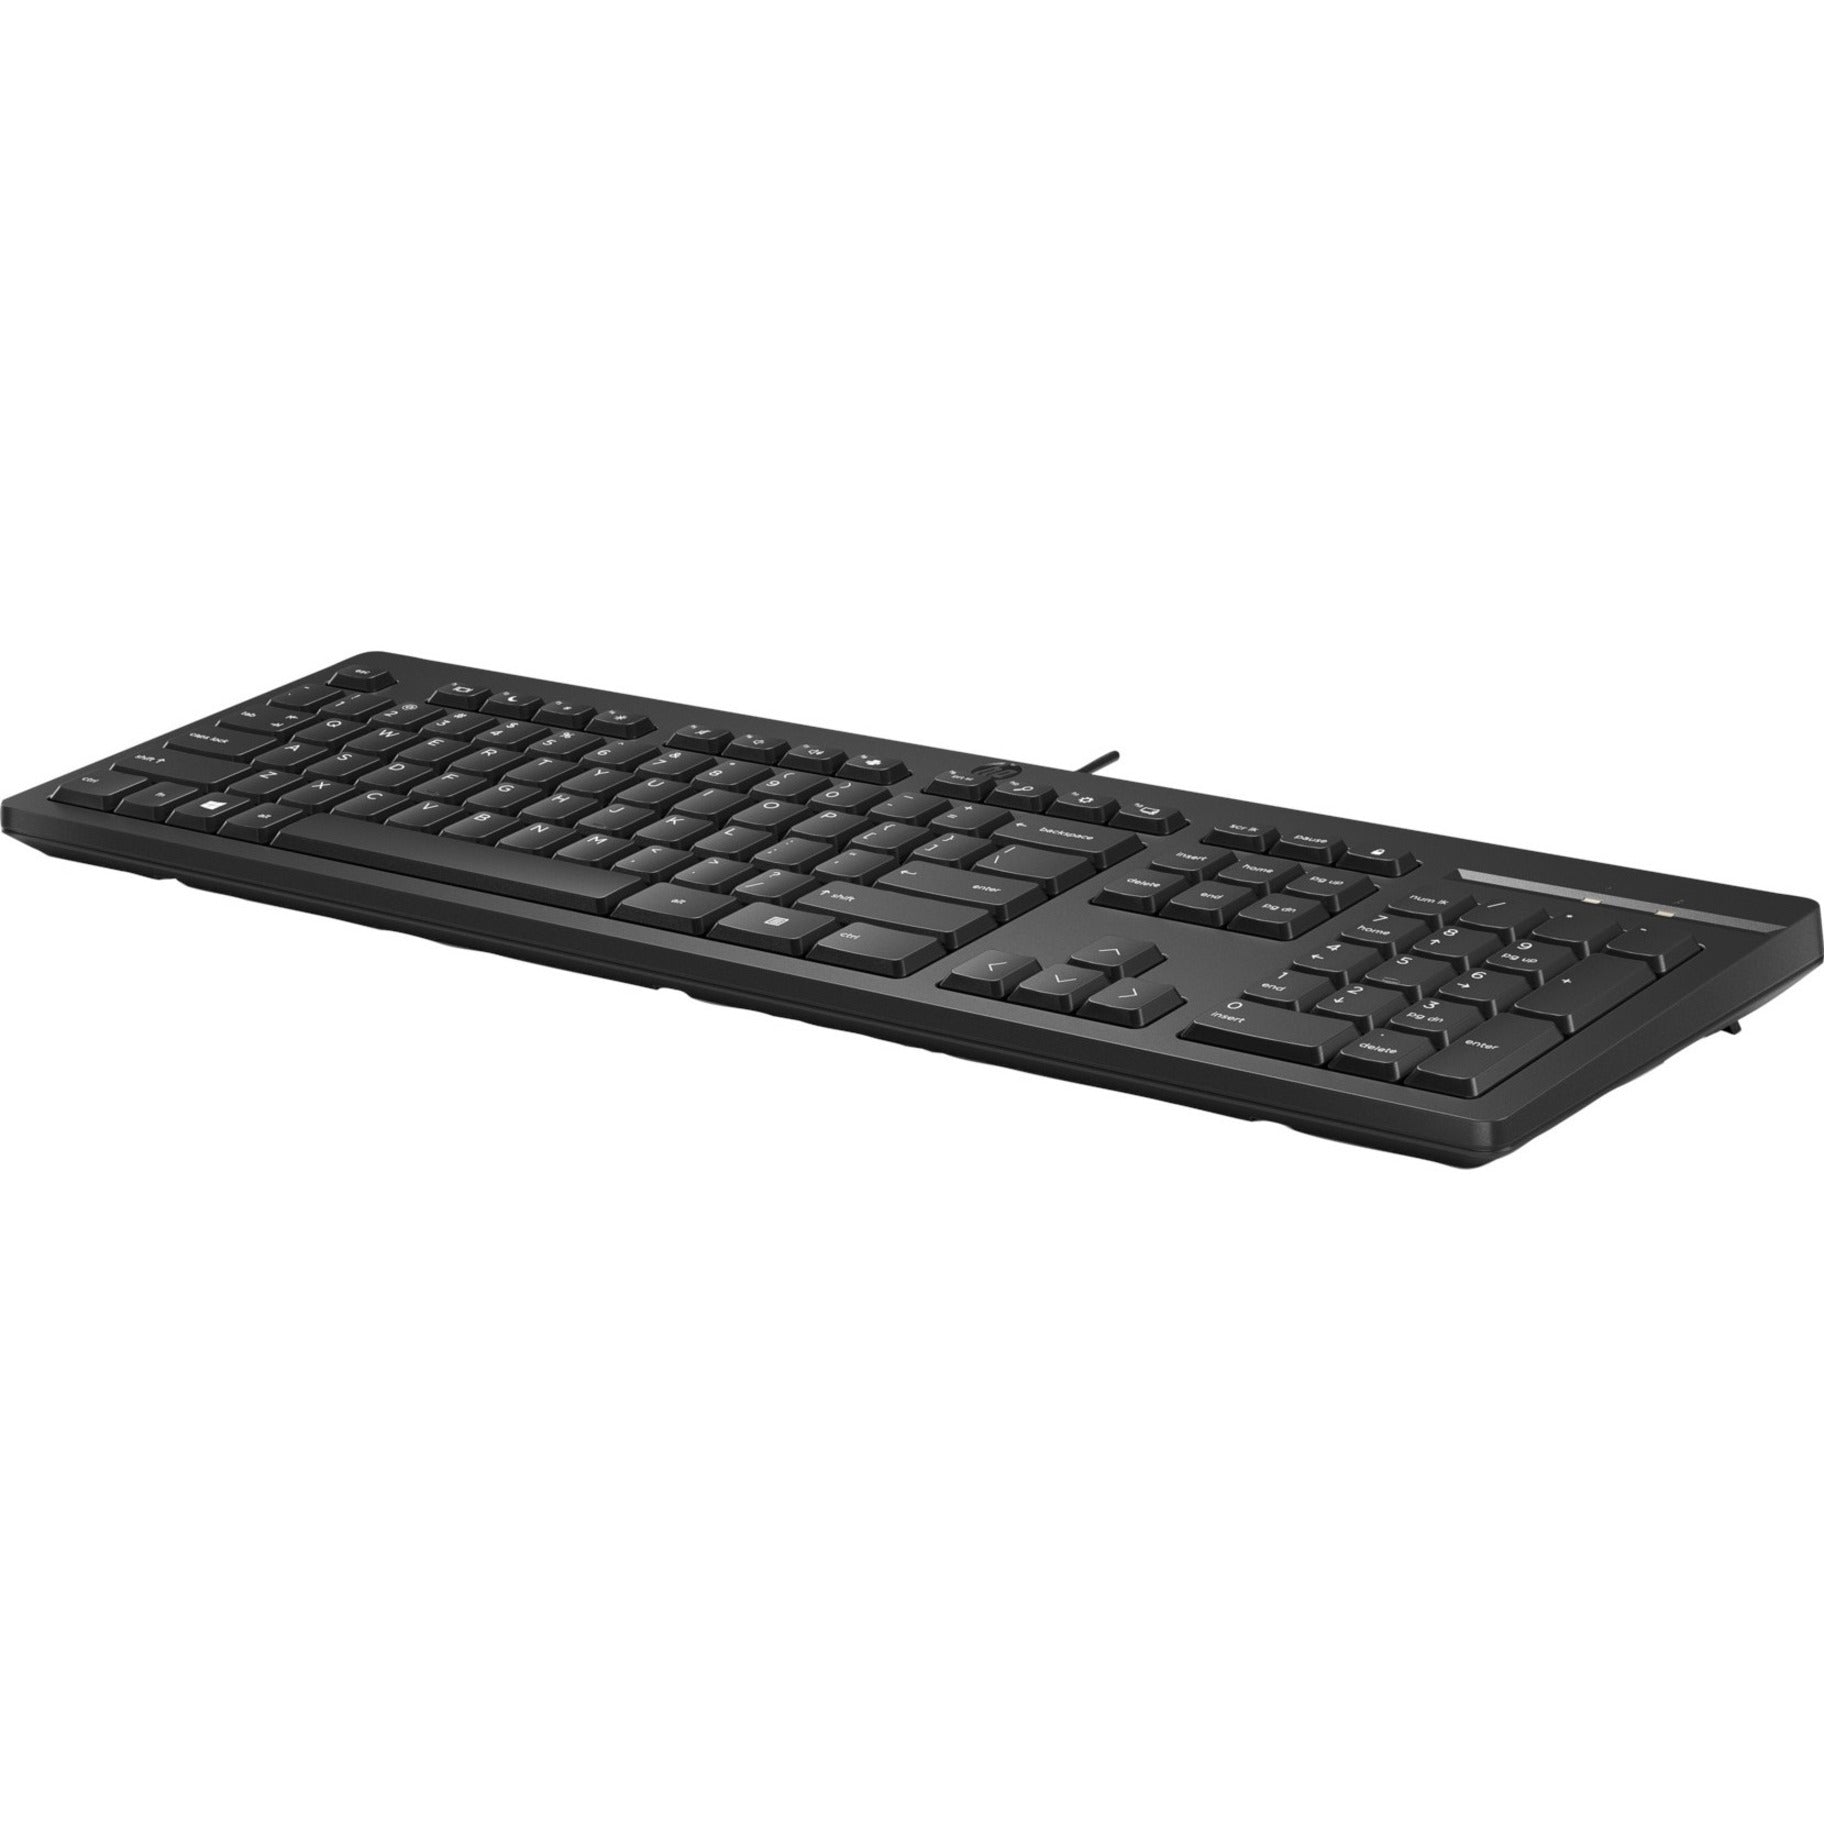 HP 125 Wired Keyboard, Plug and Play, LED Indicator, Adjustable Height